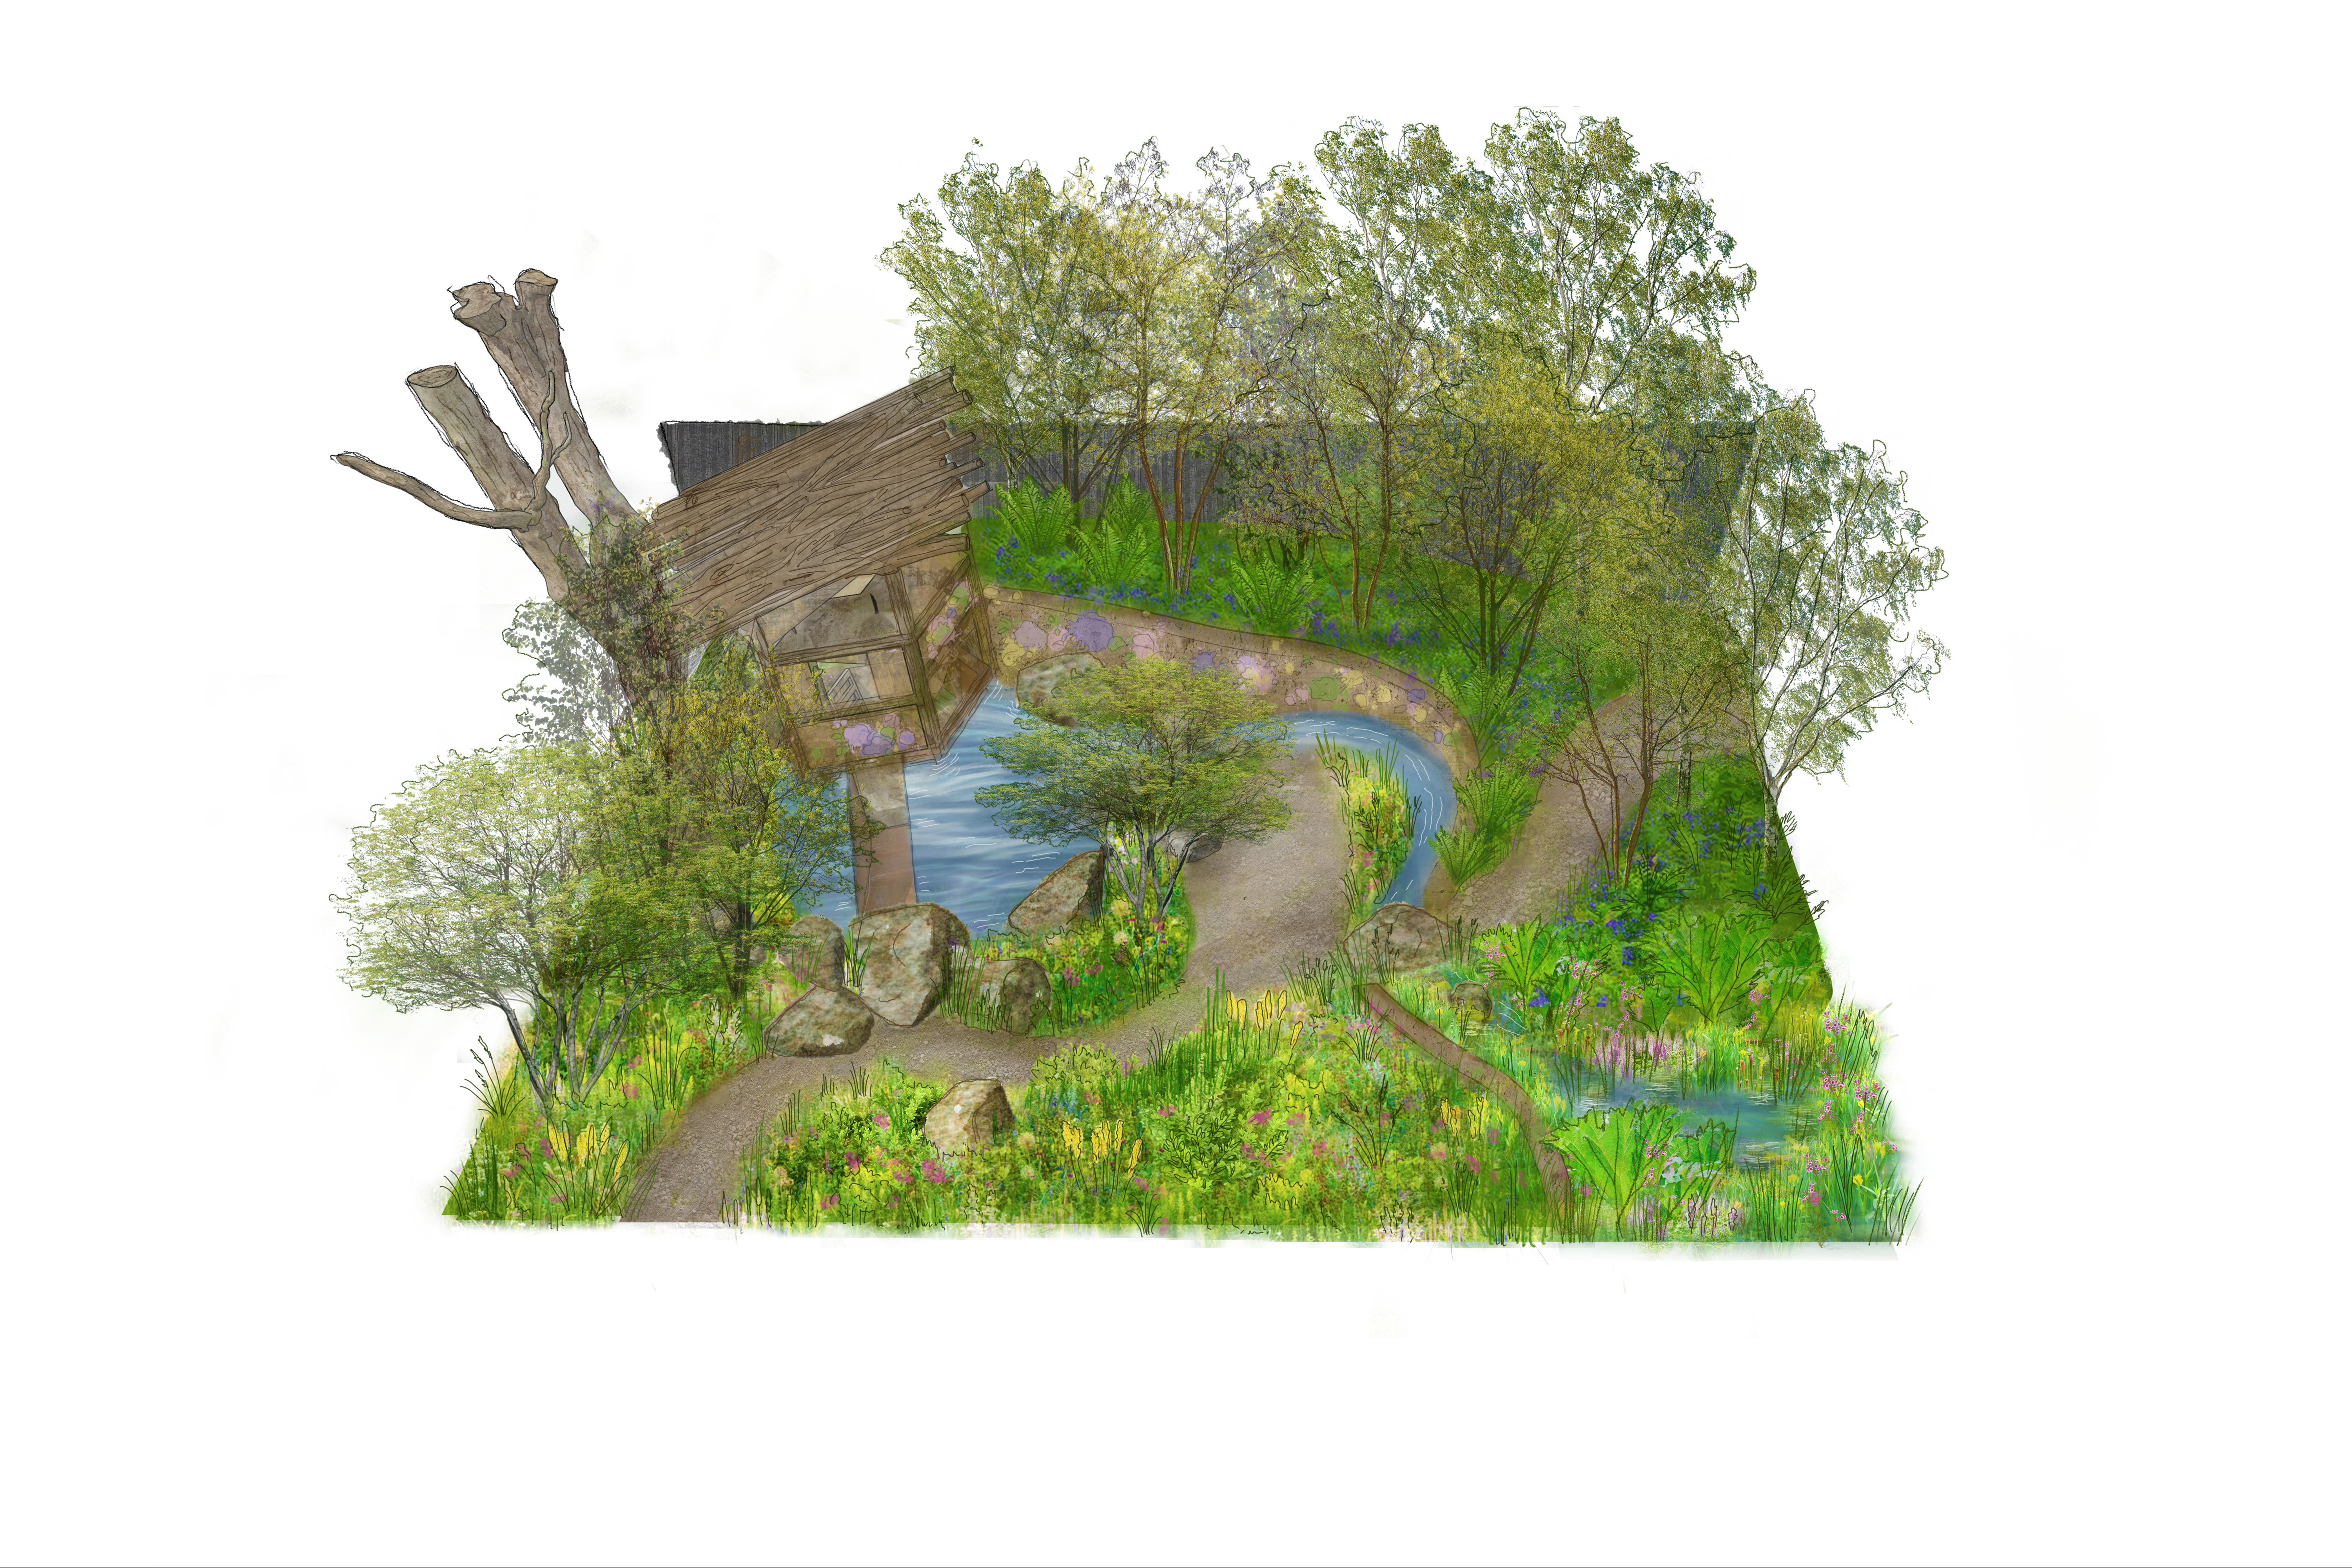 Design image of the No Adults Allowed garden featuring trees, meadow and a water feature with den